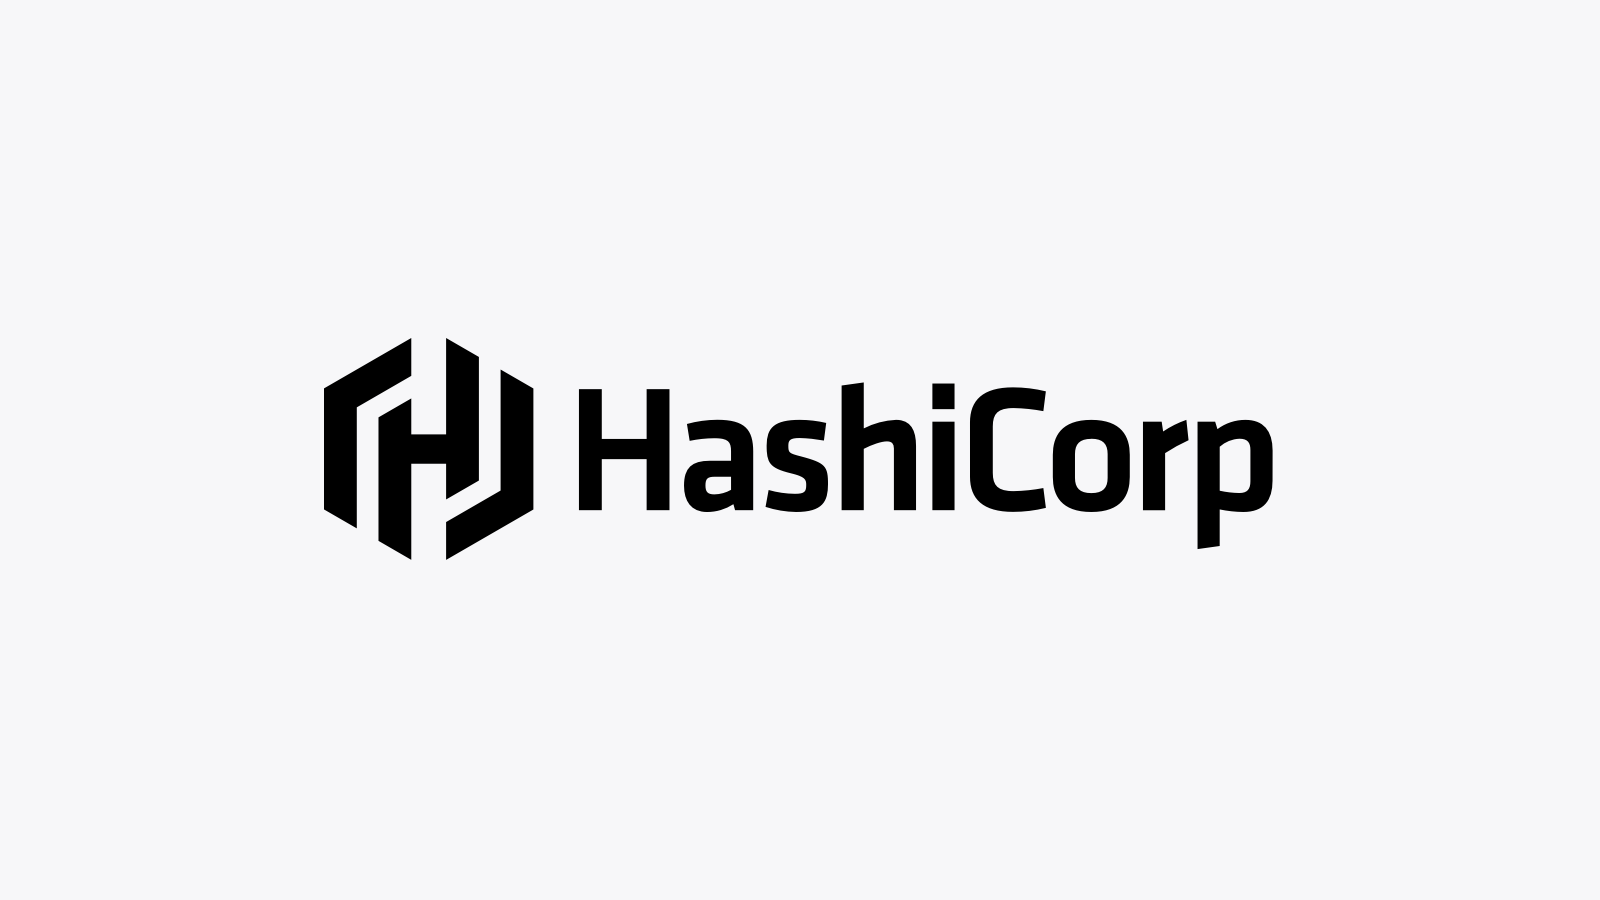 HashiCorp updates licensing FAQ based on community questions